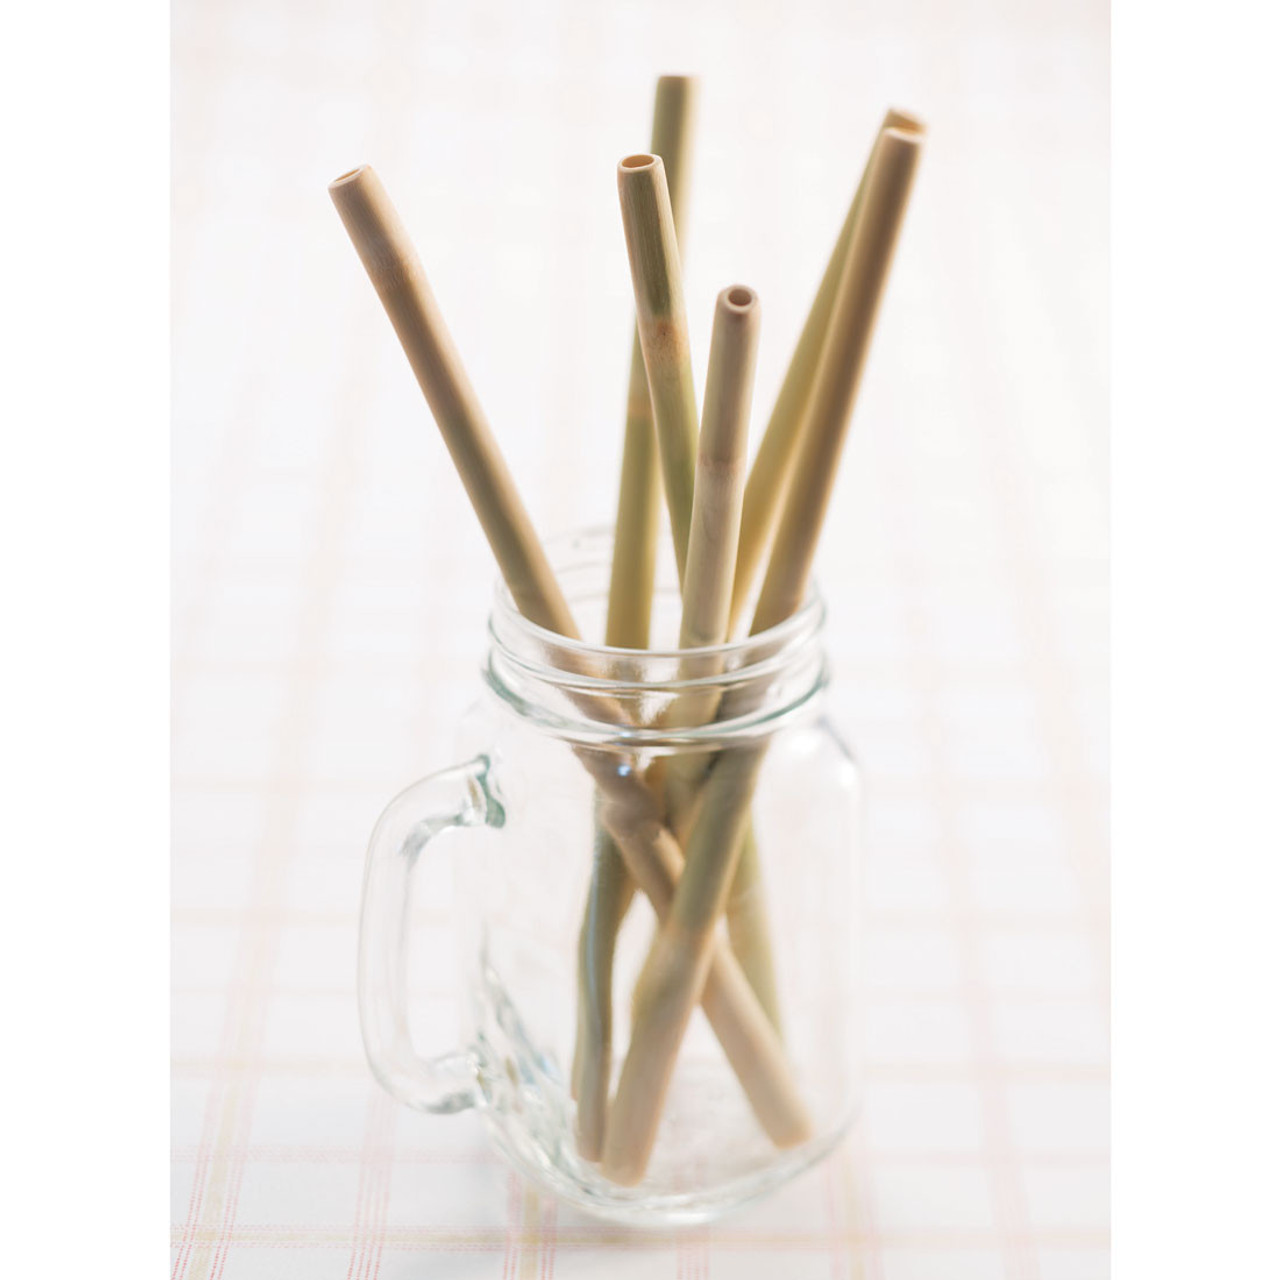 https://cdn11.bigcommerce.com/s-j602wc6a/images/stencil/1280x1280/products/6546/25806/bambo-reusable-straws-jar__75558.1550014943.jpg?c=2